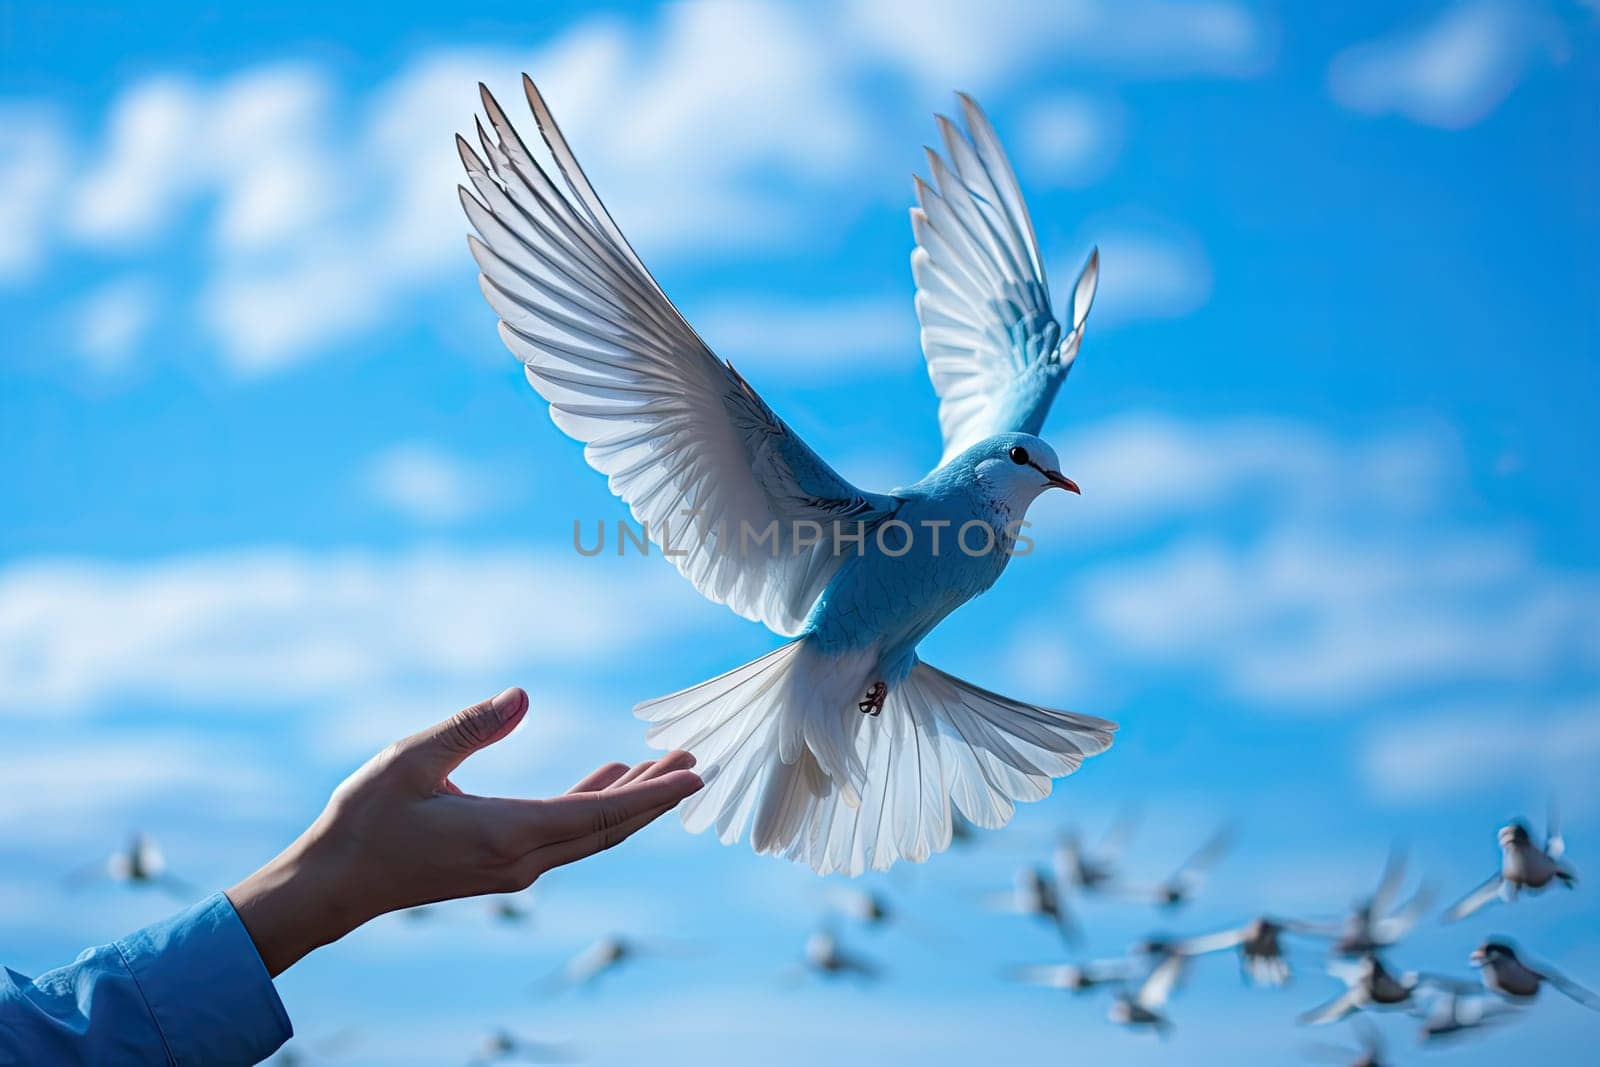 a bird flying in the air with its wings spread out and it is about to land on someone's hand